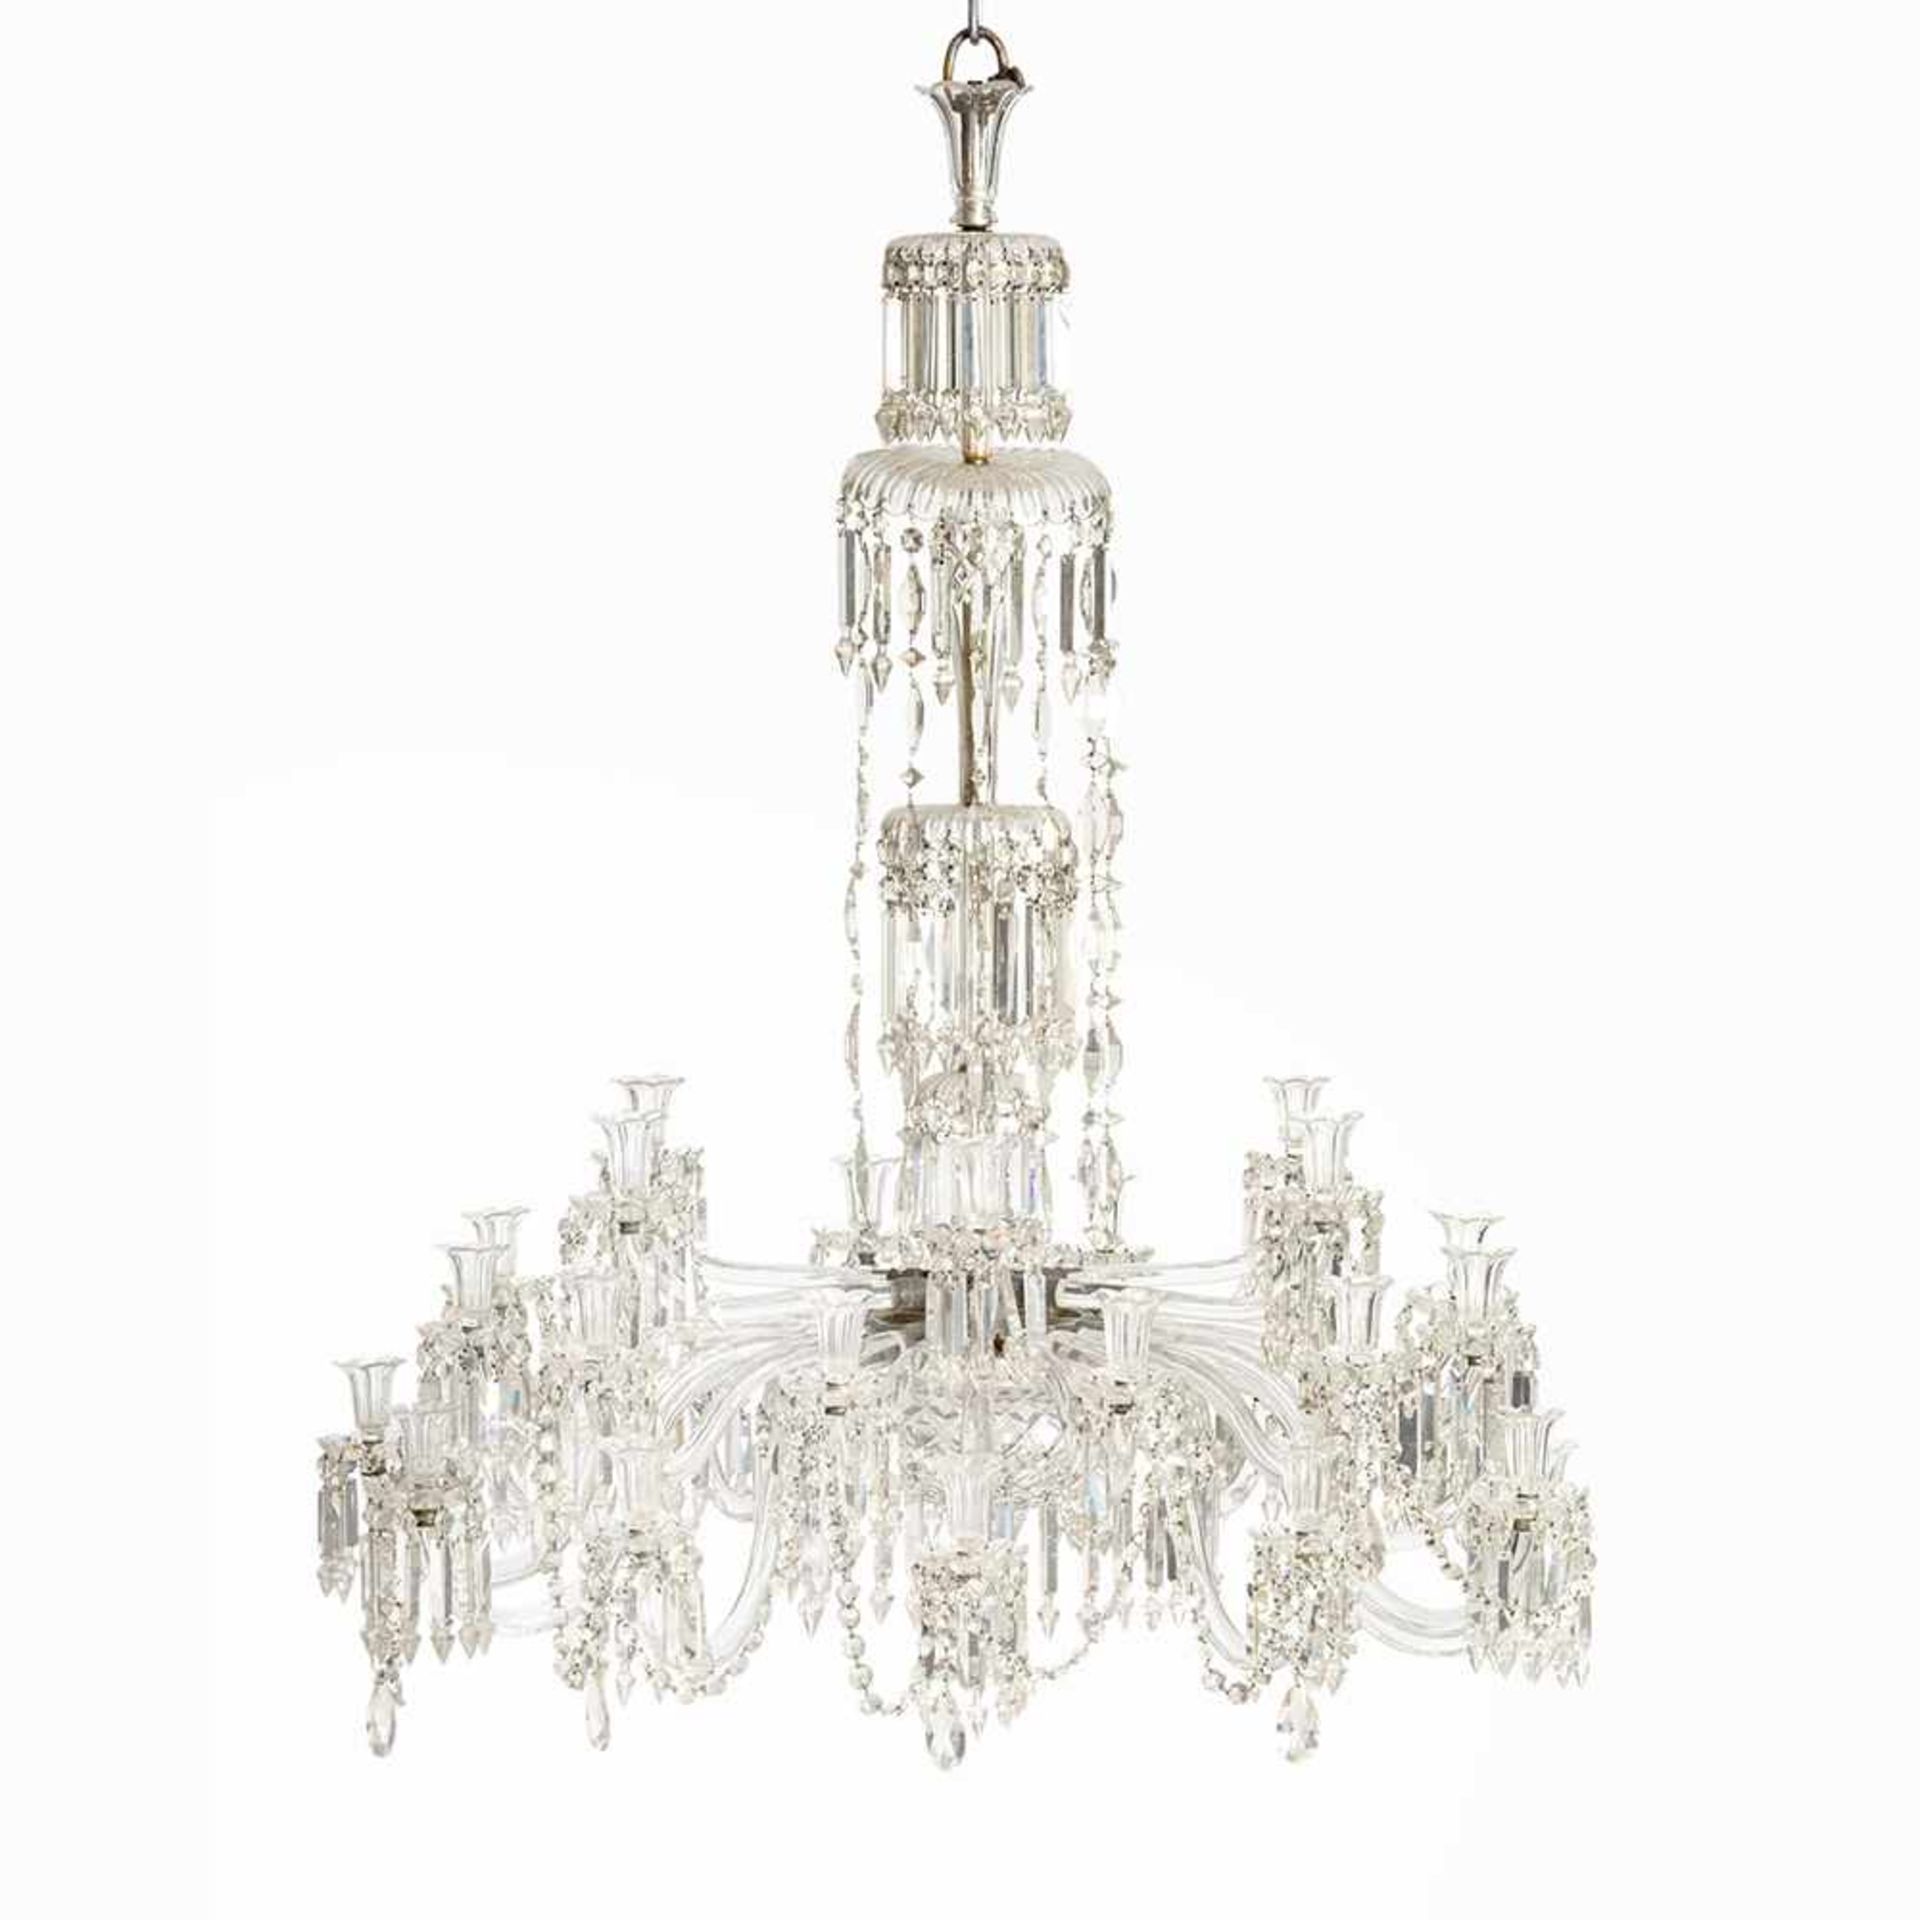 Magnificent Baccarat Chandelier, France, 19th C. Baccarat crystal France, 19th century 30 electric - Image 10 of 10